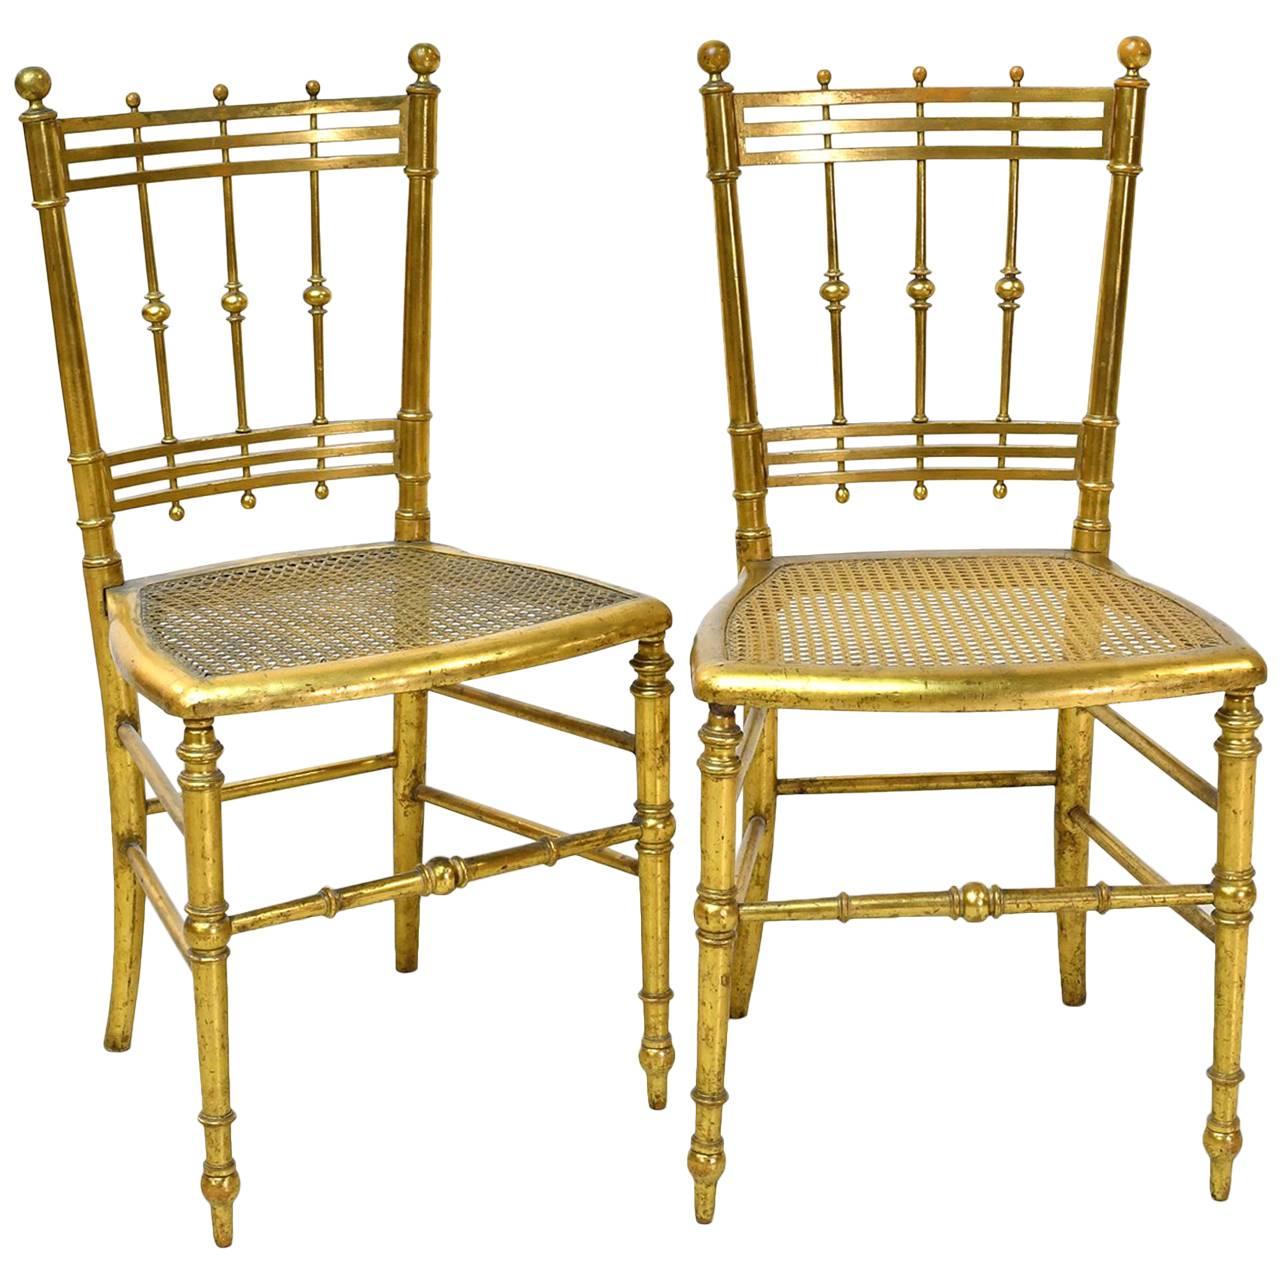 Pair of Early 20th Century French Belle Époque Salon/ Dining Chairs in Giltwood